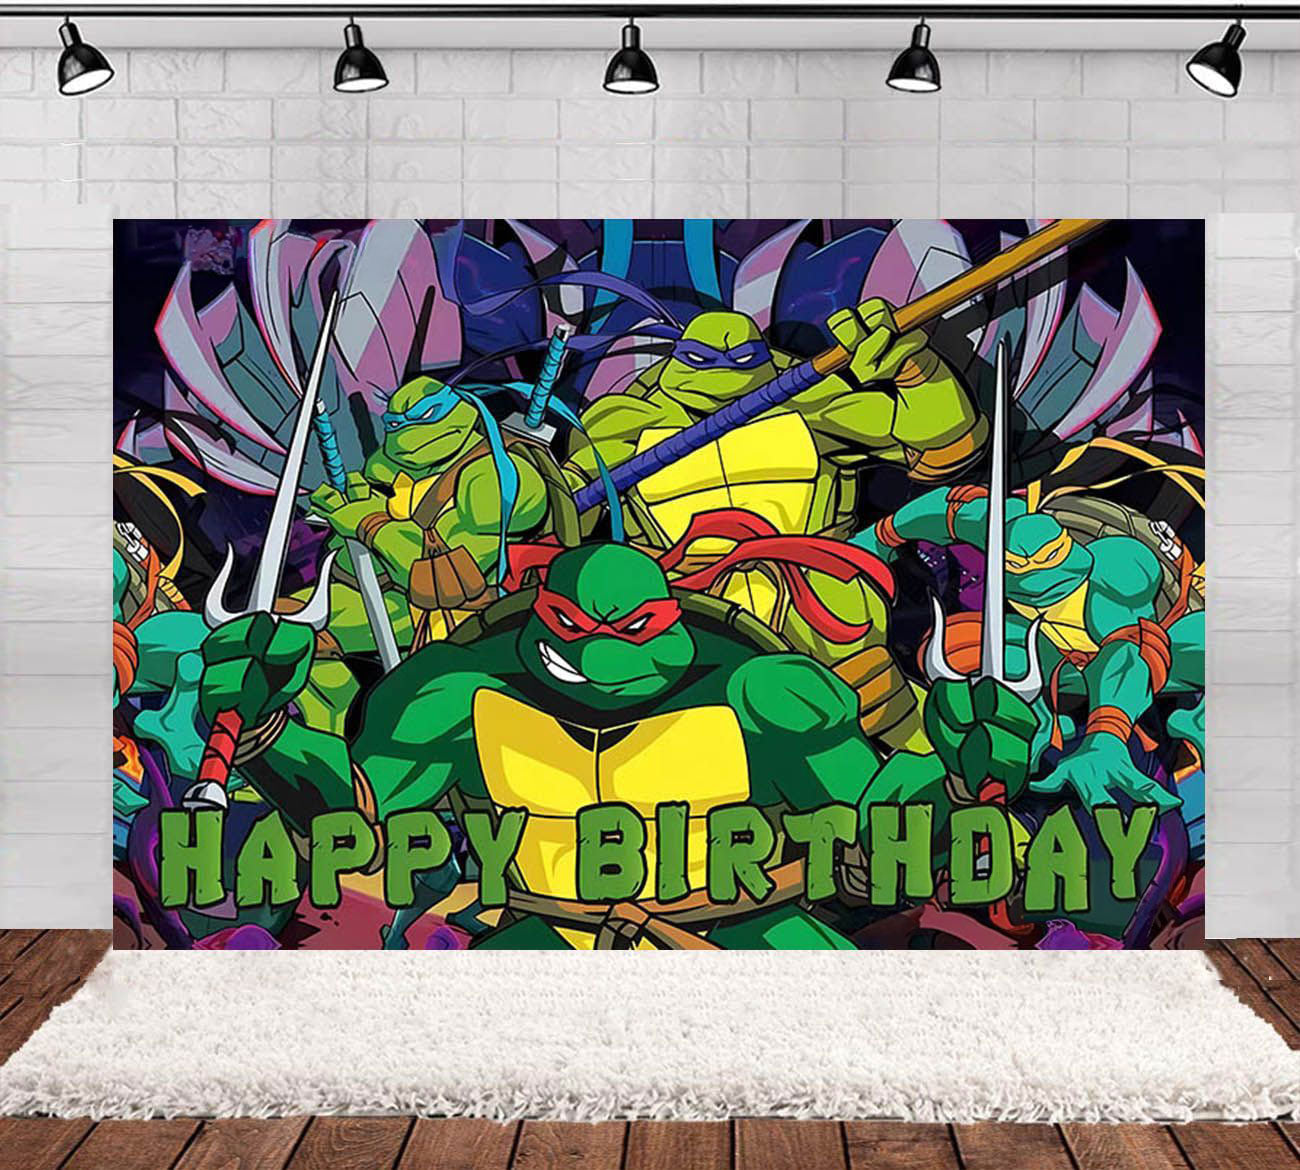 Teenage Mutant Ninja Turtles themed fabric backdrop for your birthday party decoration!